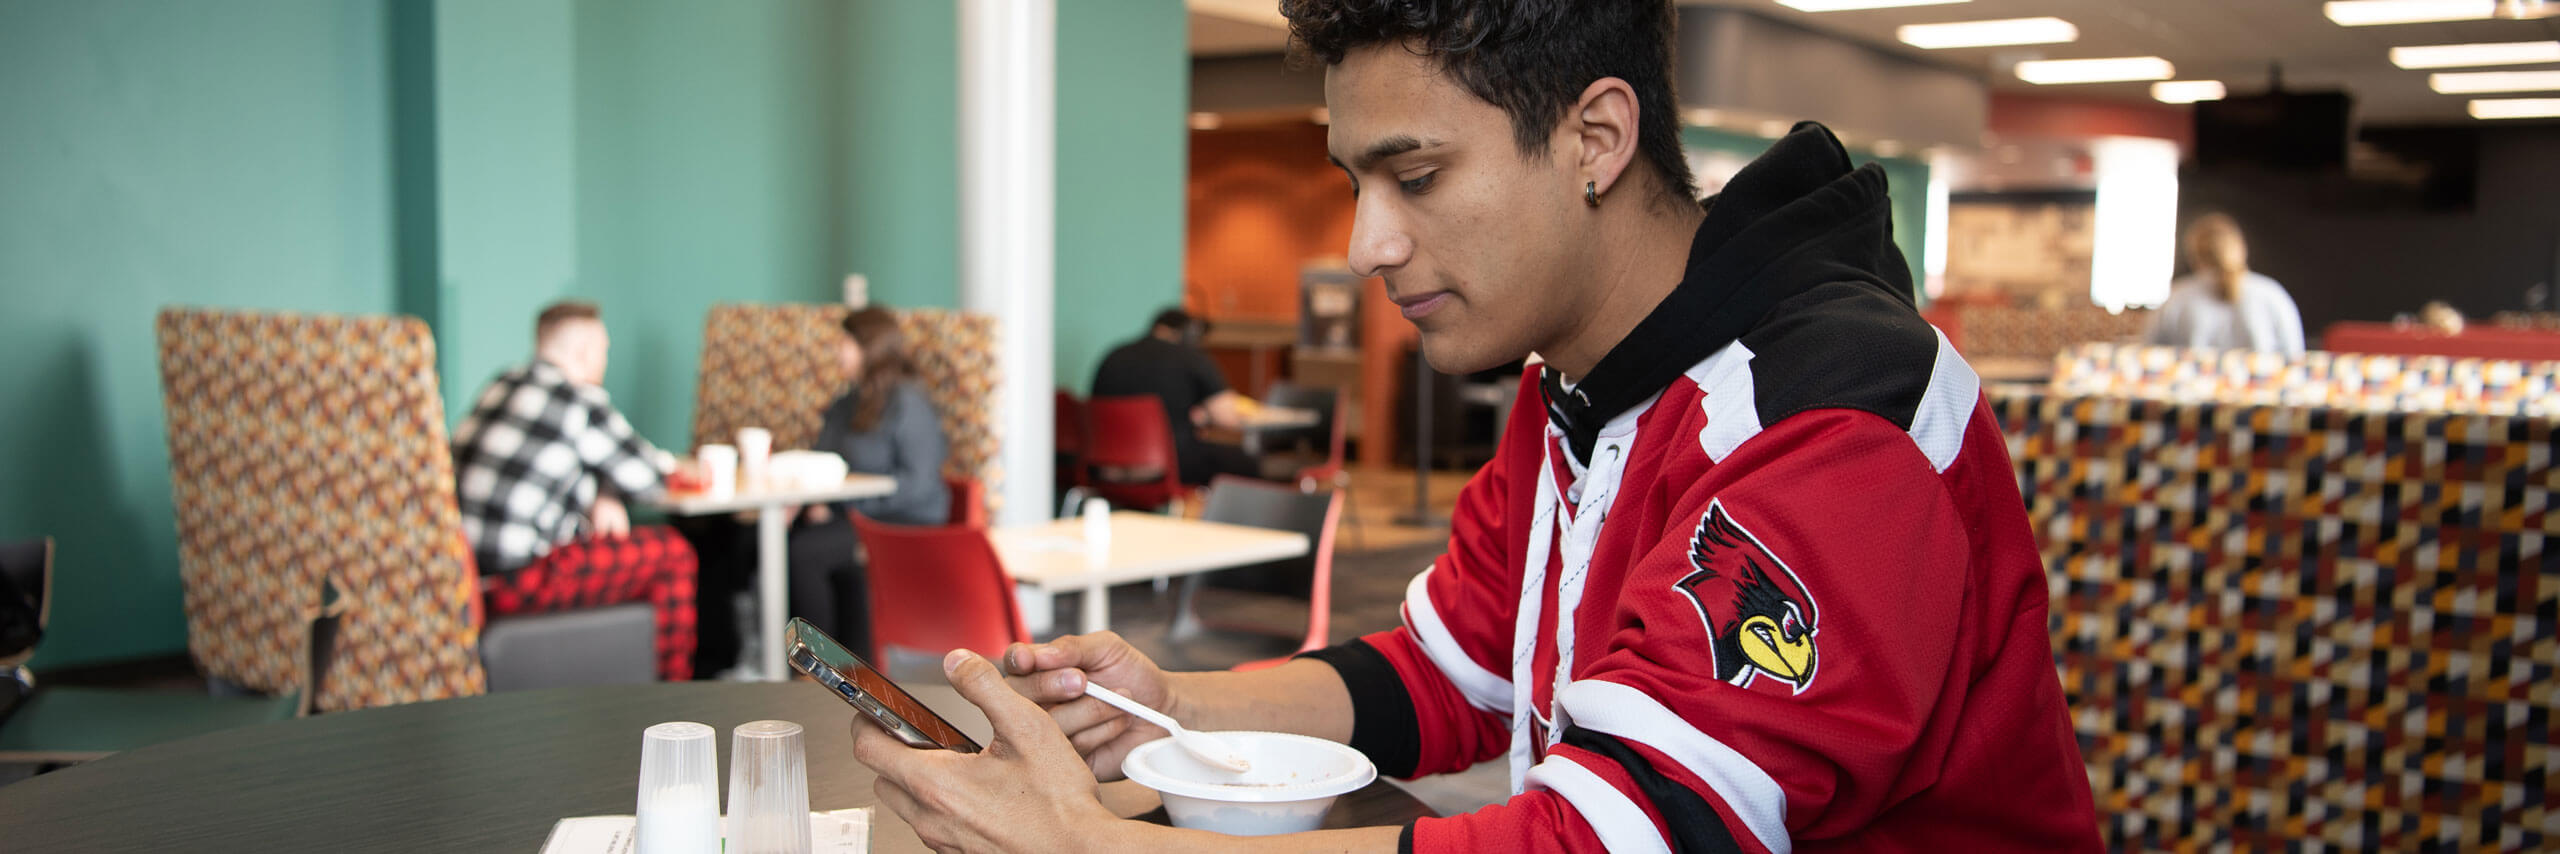 Student eats breakfast while looking at his phone.